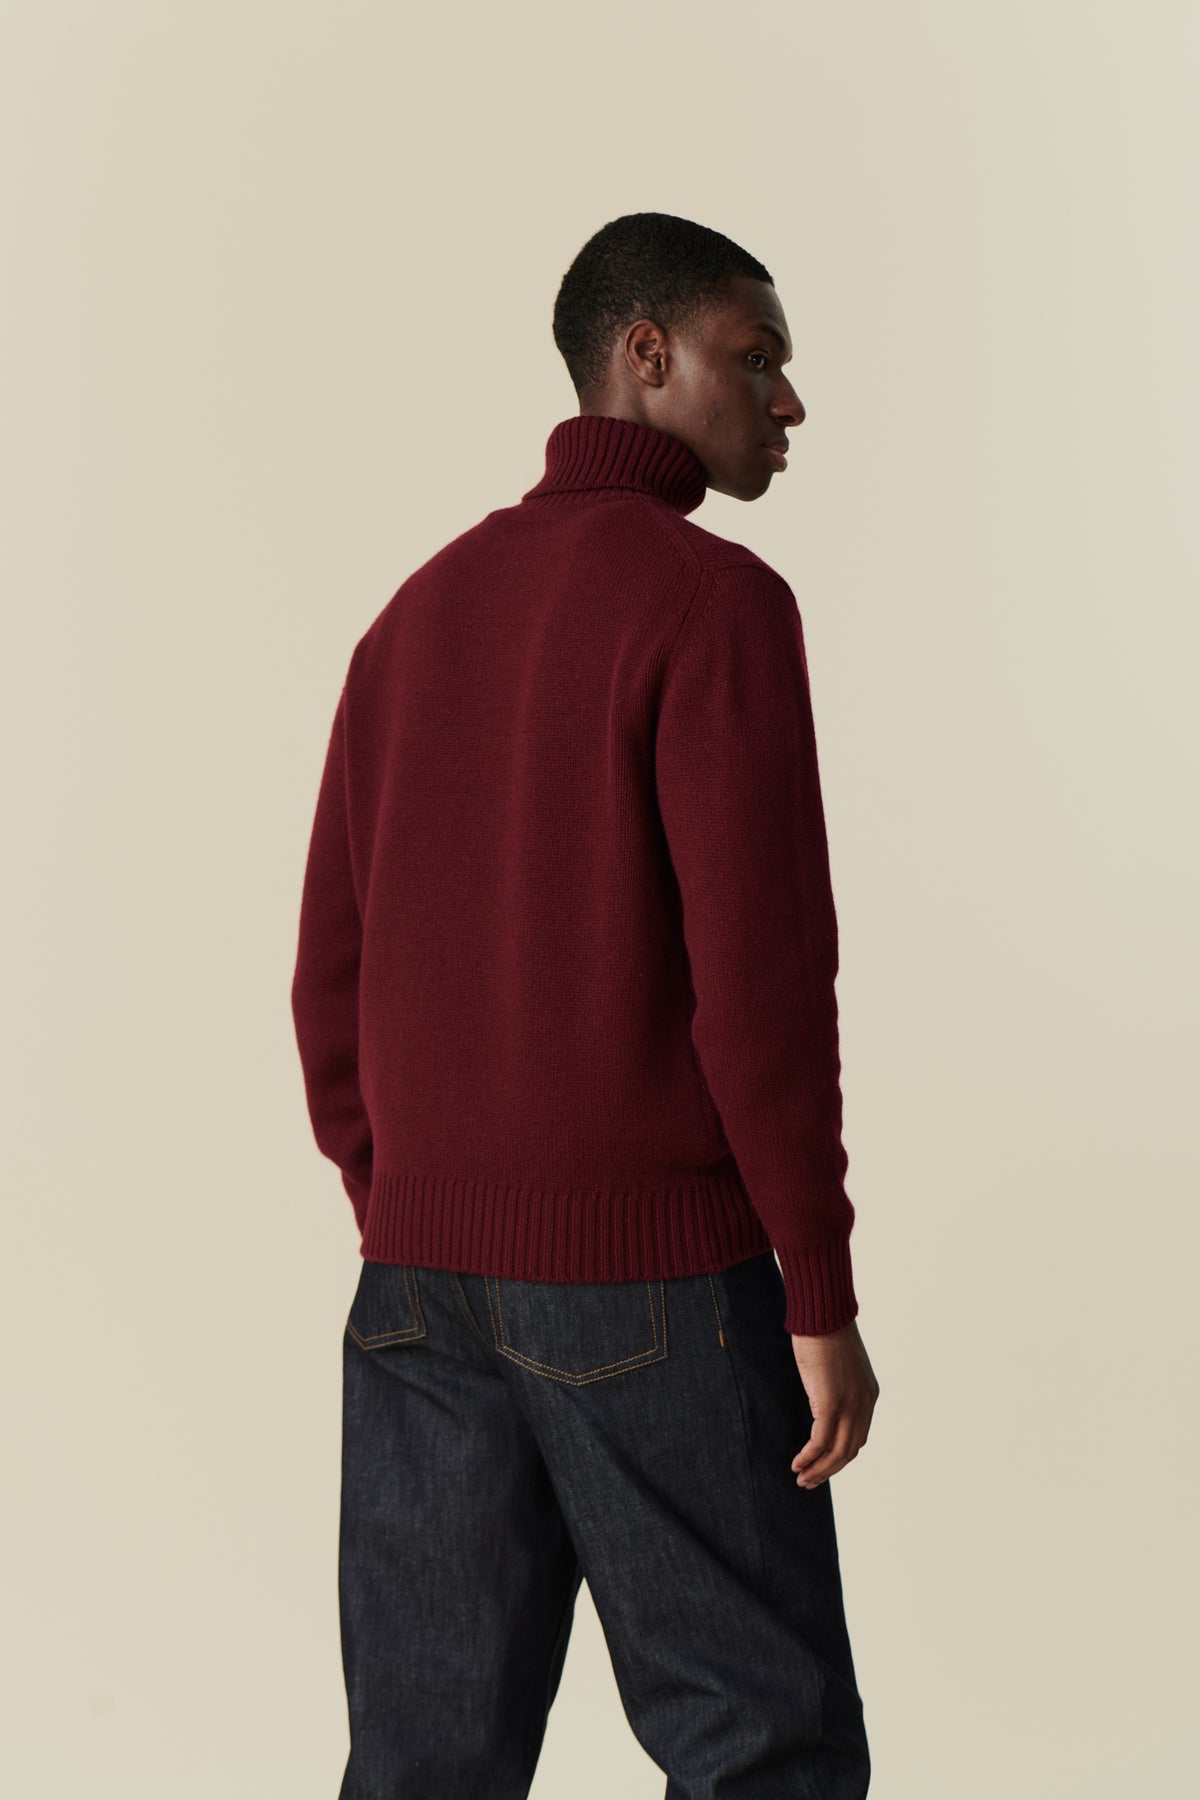 
            Back of male wearing lambswool roll neck in burgundy